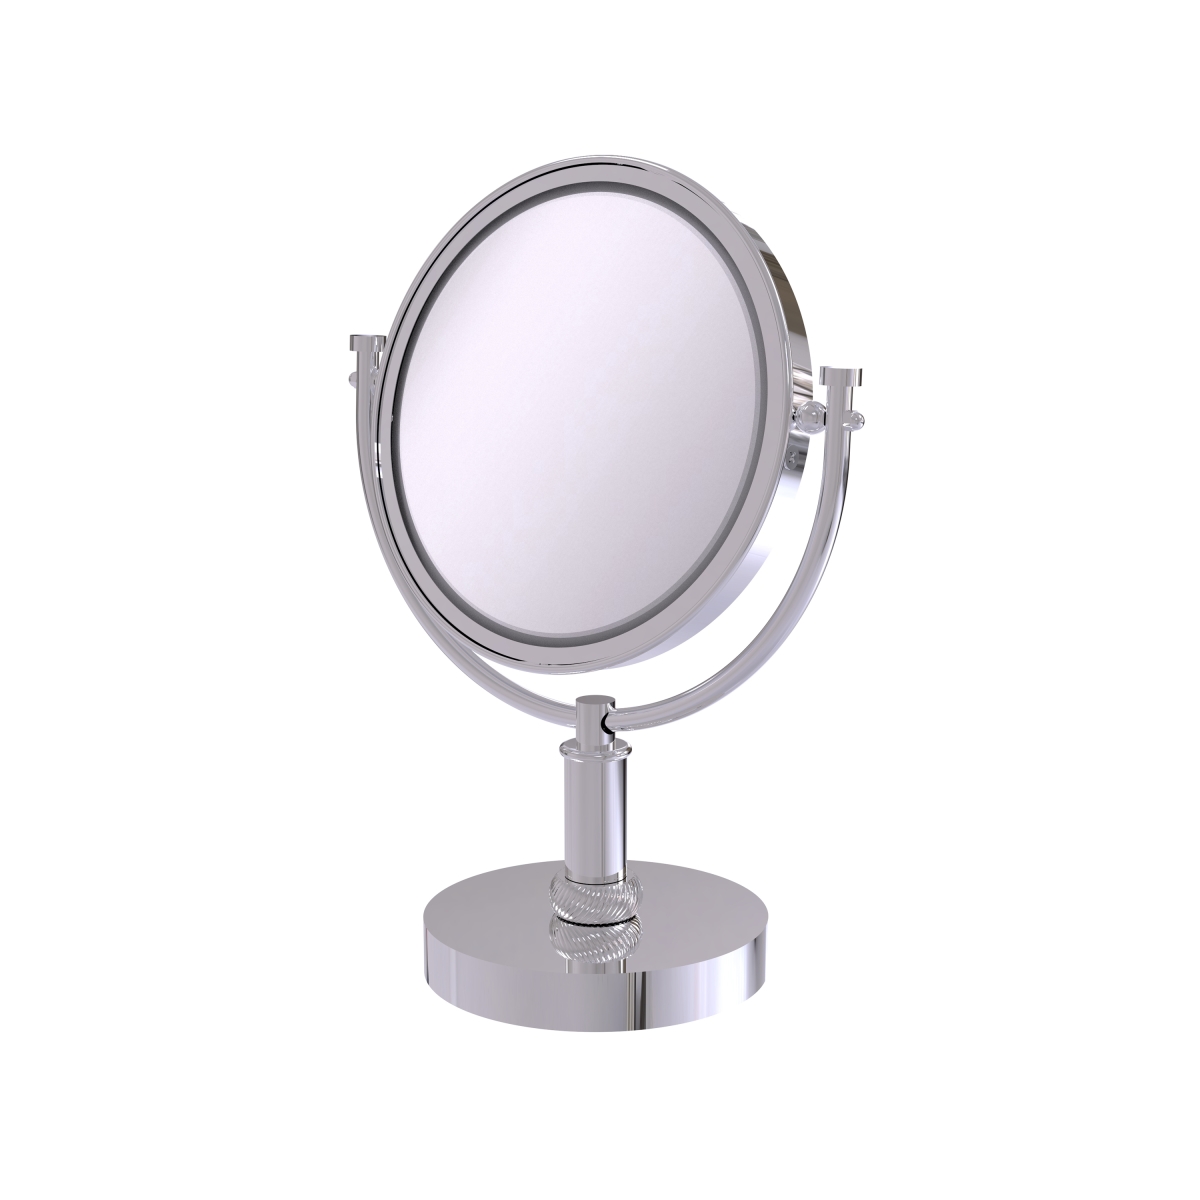 DM-4T-2X-PC 8 in. Vanity Top Make-Up Mirror 2X Magnification, Polished Chrome - 15 x 8 x 8 in -  Allied Brass, DM-4T/2X-PC